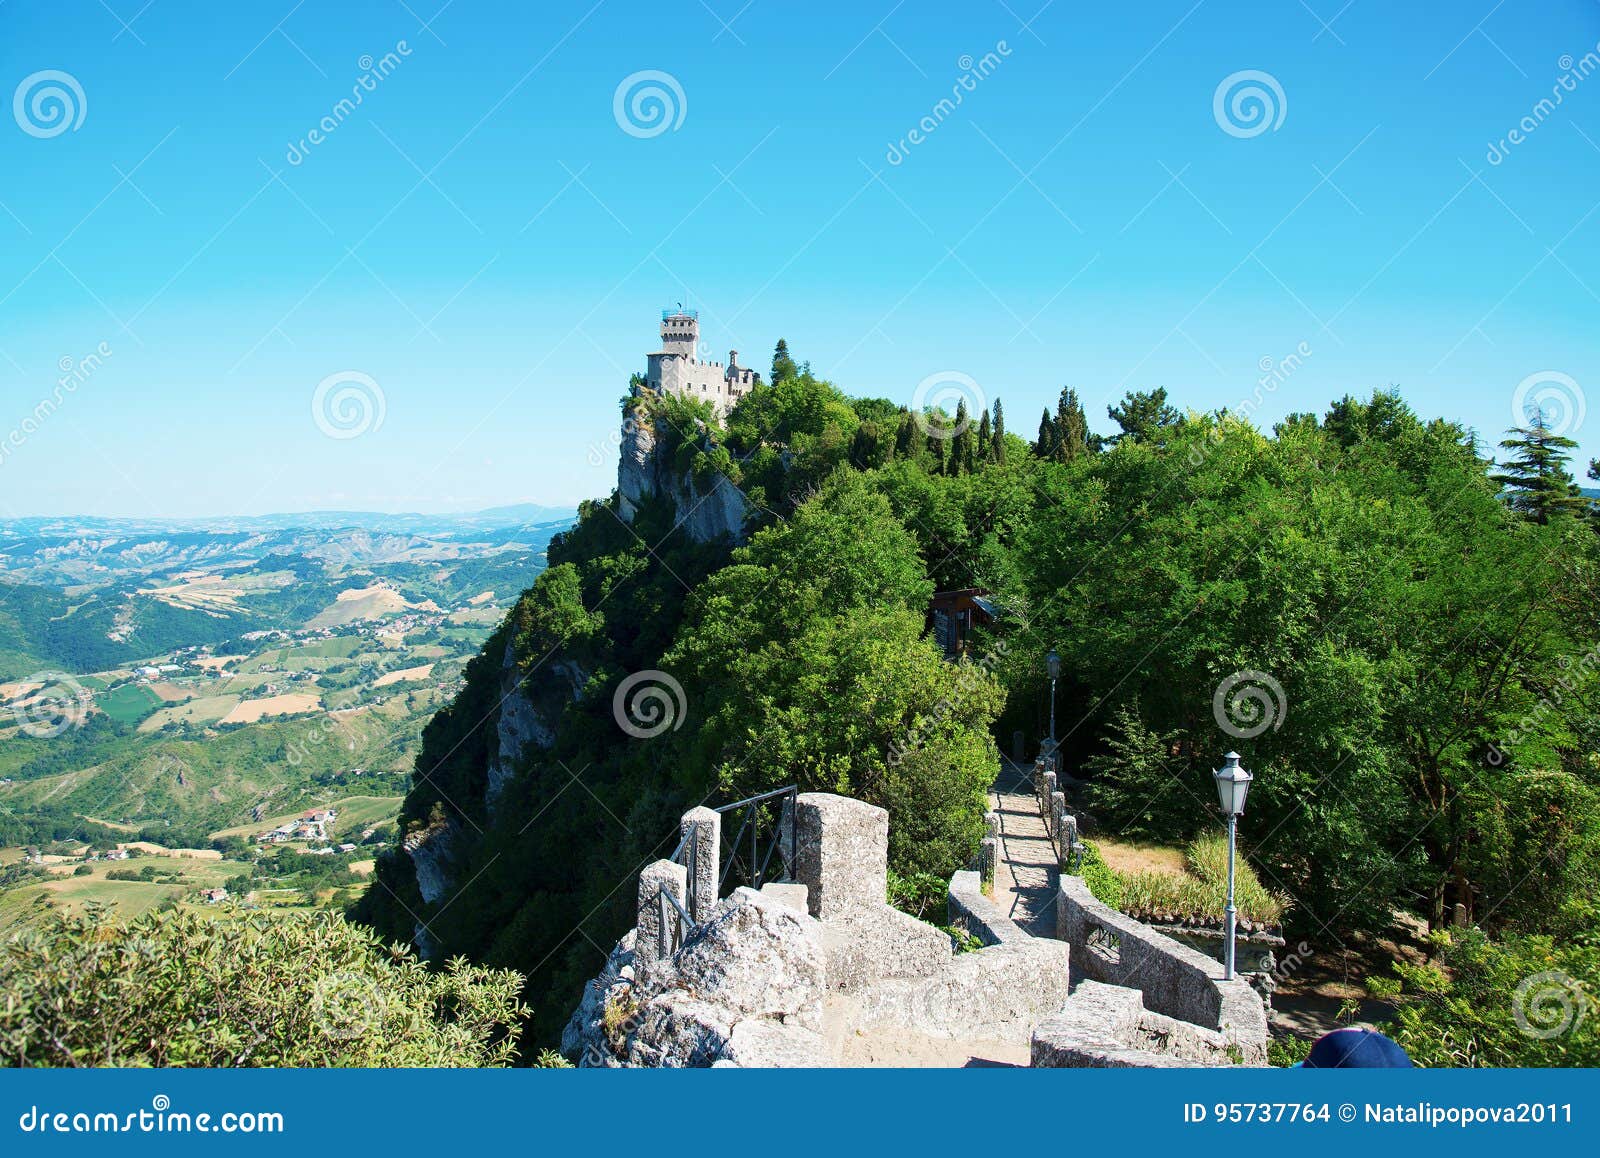 aerial view of cesta and the montale on the cliff edge on mount